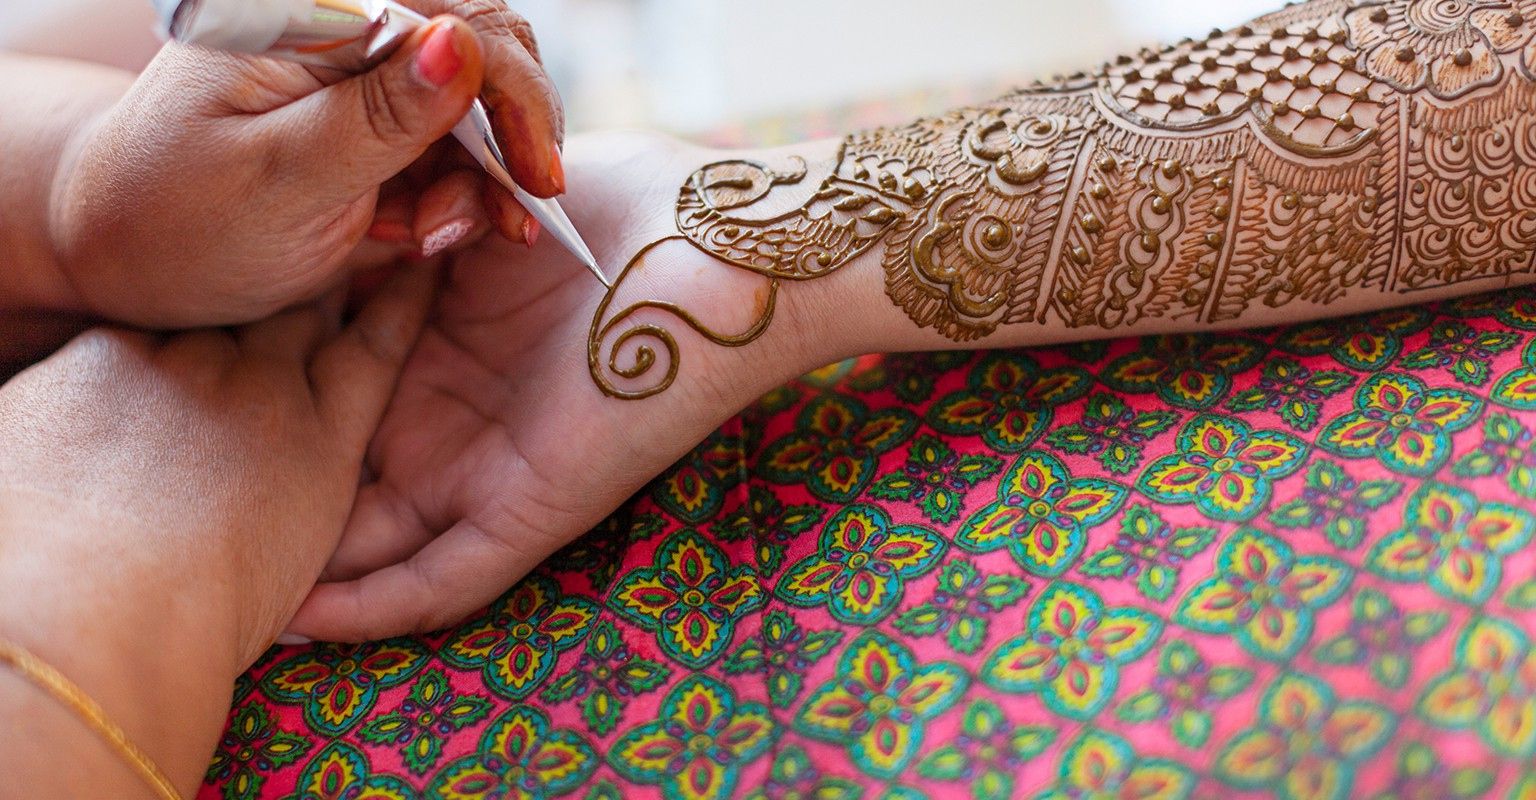 The 10 Best Henna Artists in Orlando, FL (with Free Estimates)